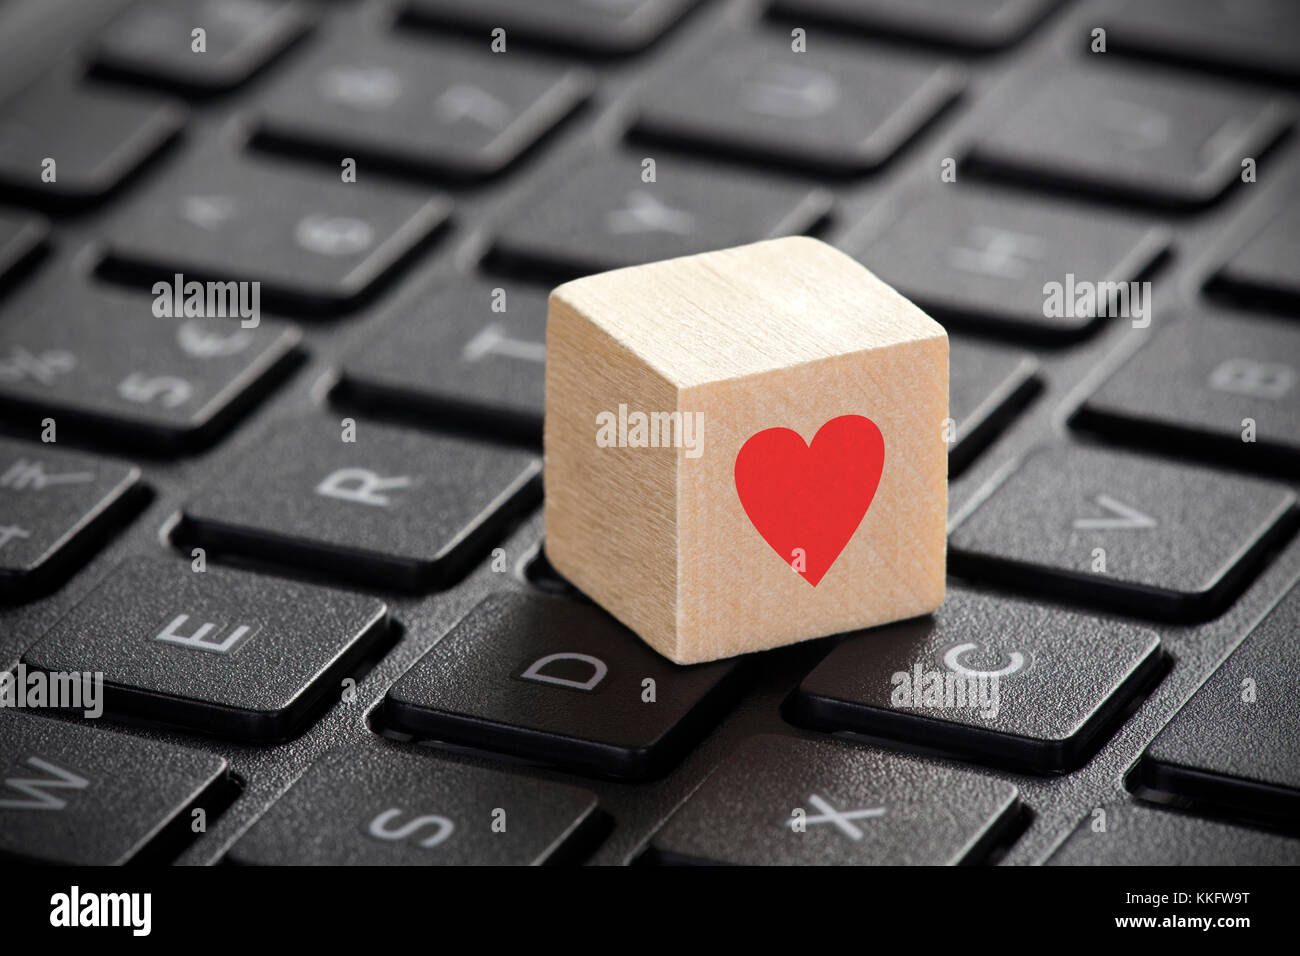 Wooden block with red heart shape on laptop keyboard. Stock Photo